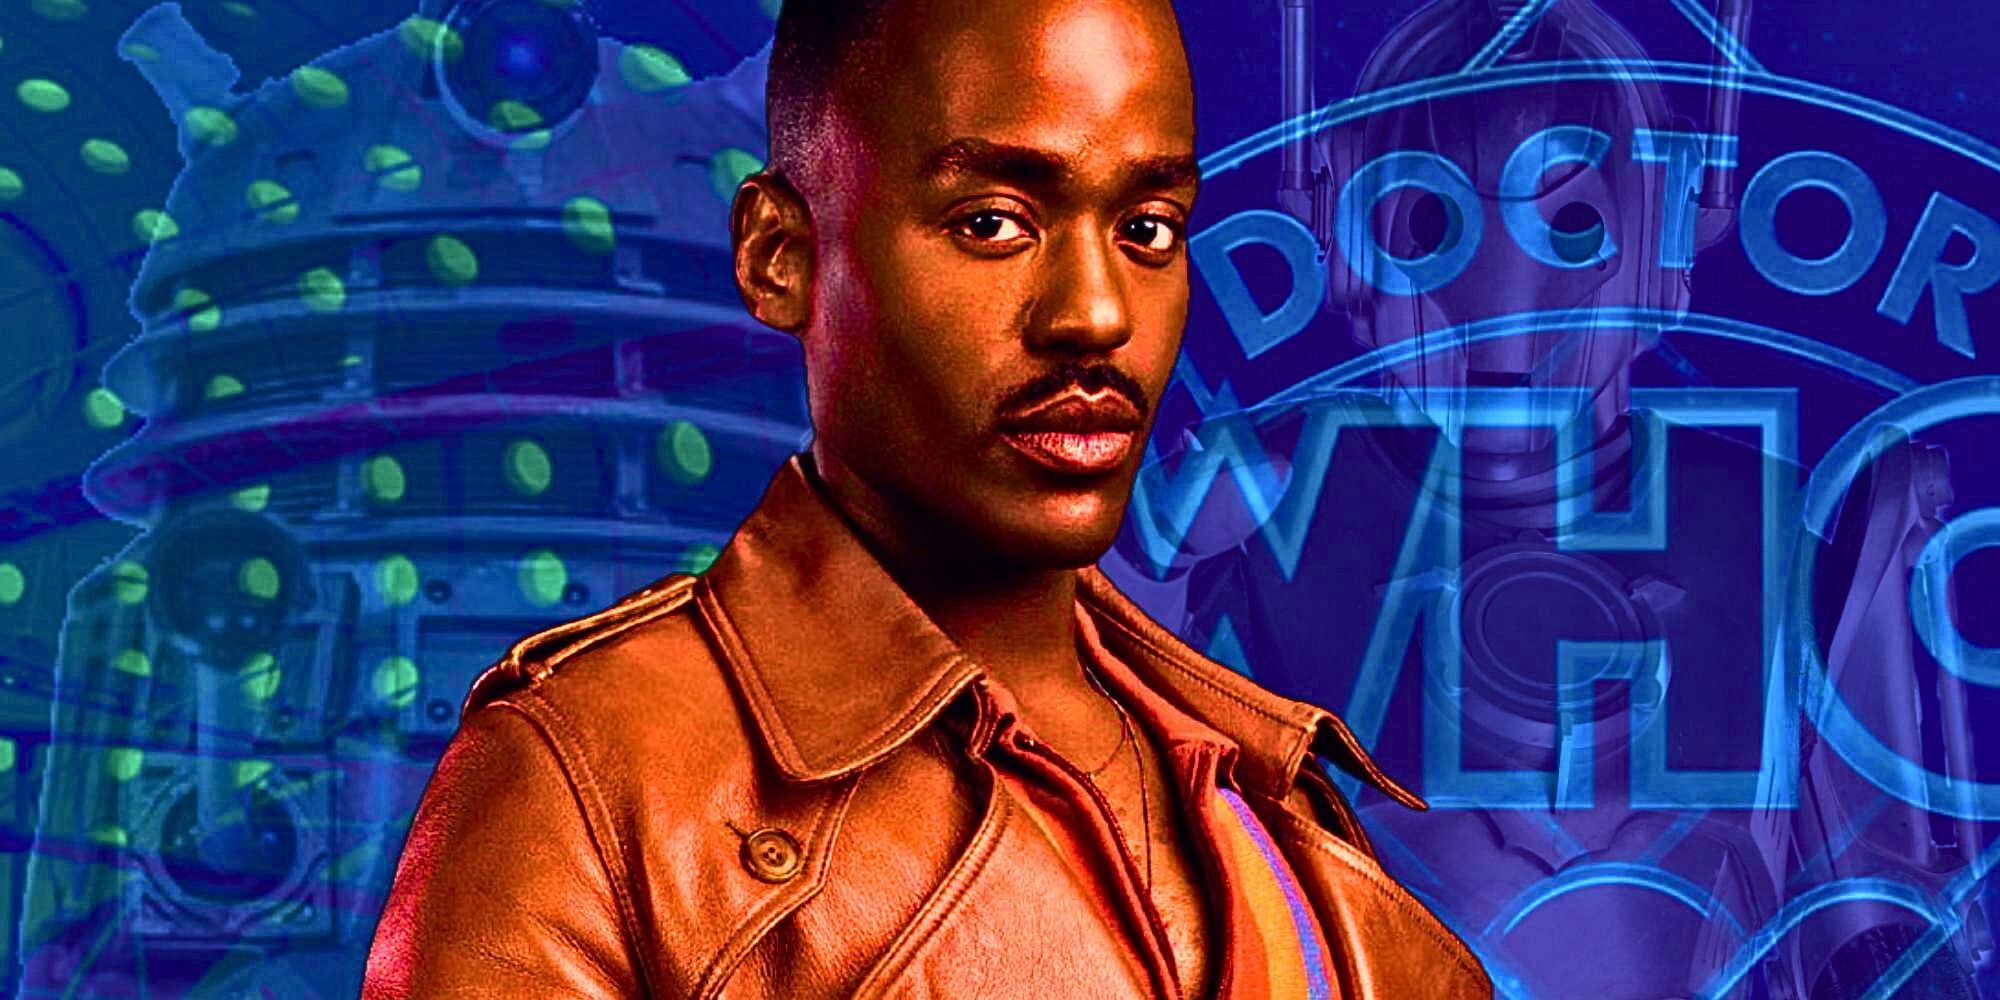 A custom image of Ncuti Gatwa as the Fifteenth Doctor against a backdrop of various Doctor Who imagery